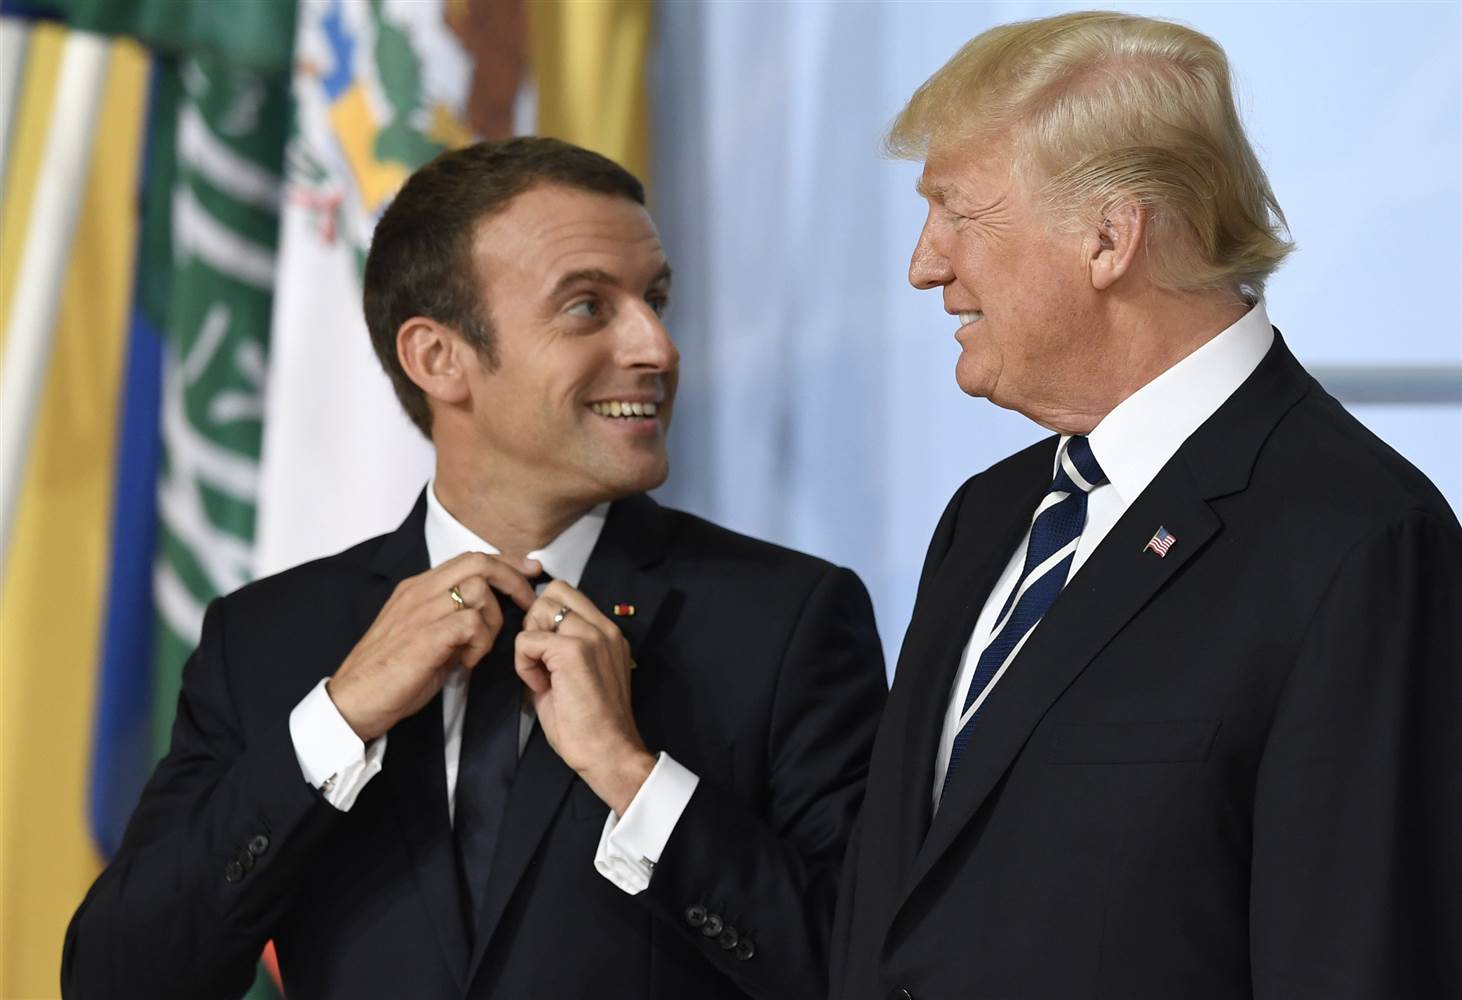 Amid divisions with Macron, Trump to travel to Paris to discuss Syria, terrorism